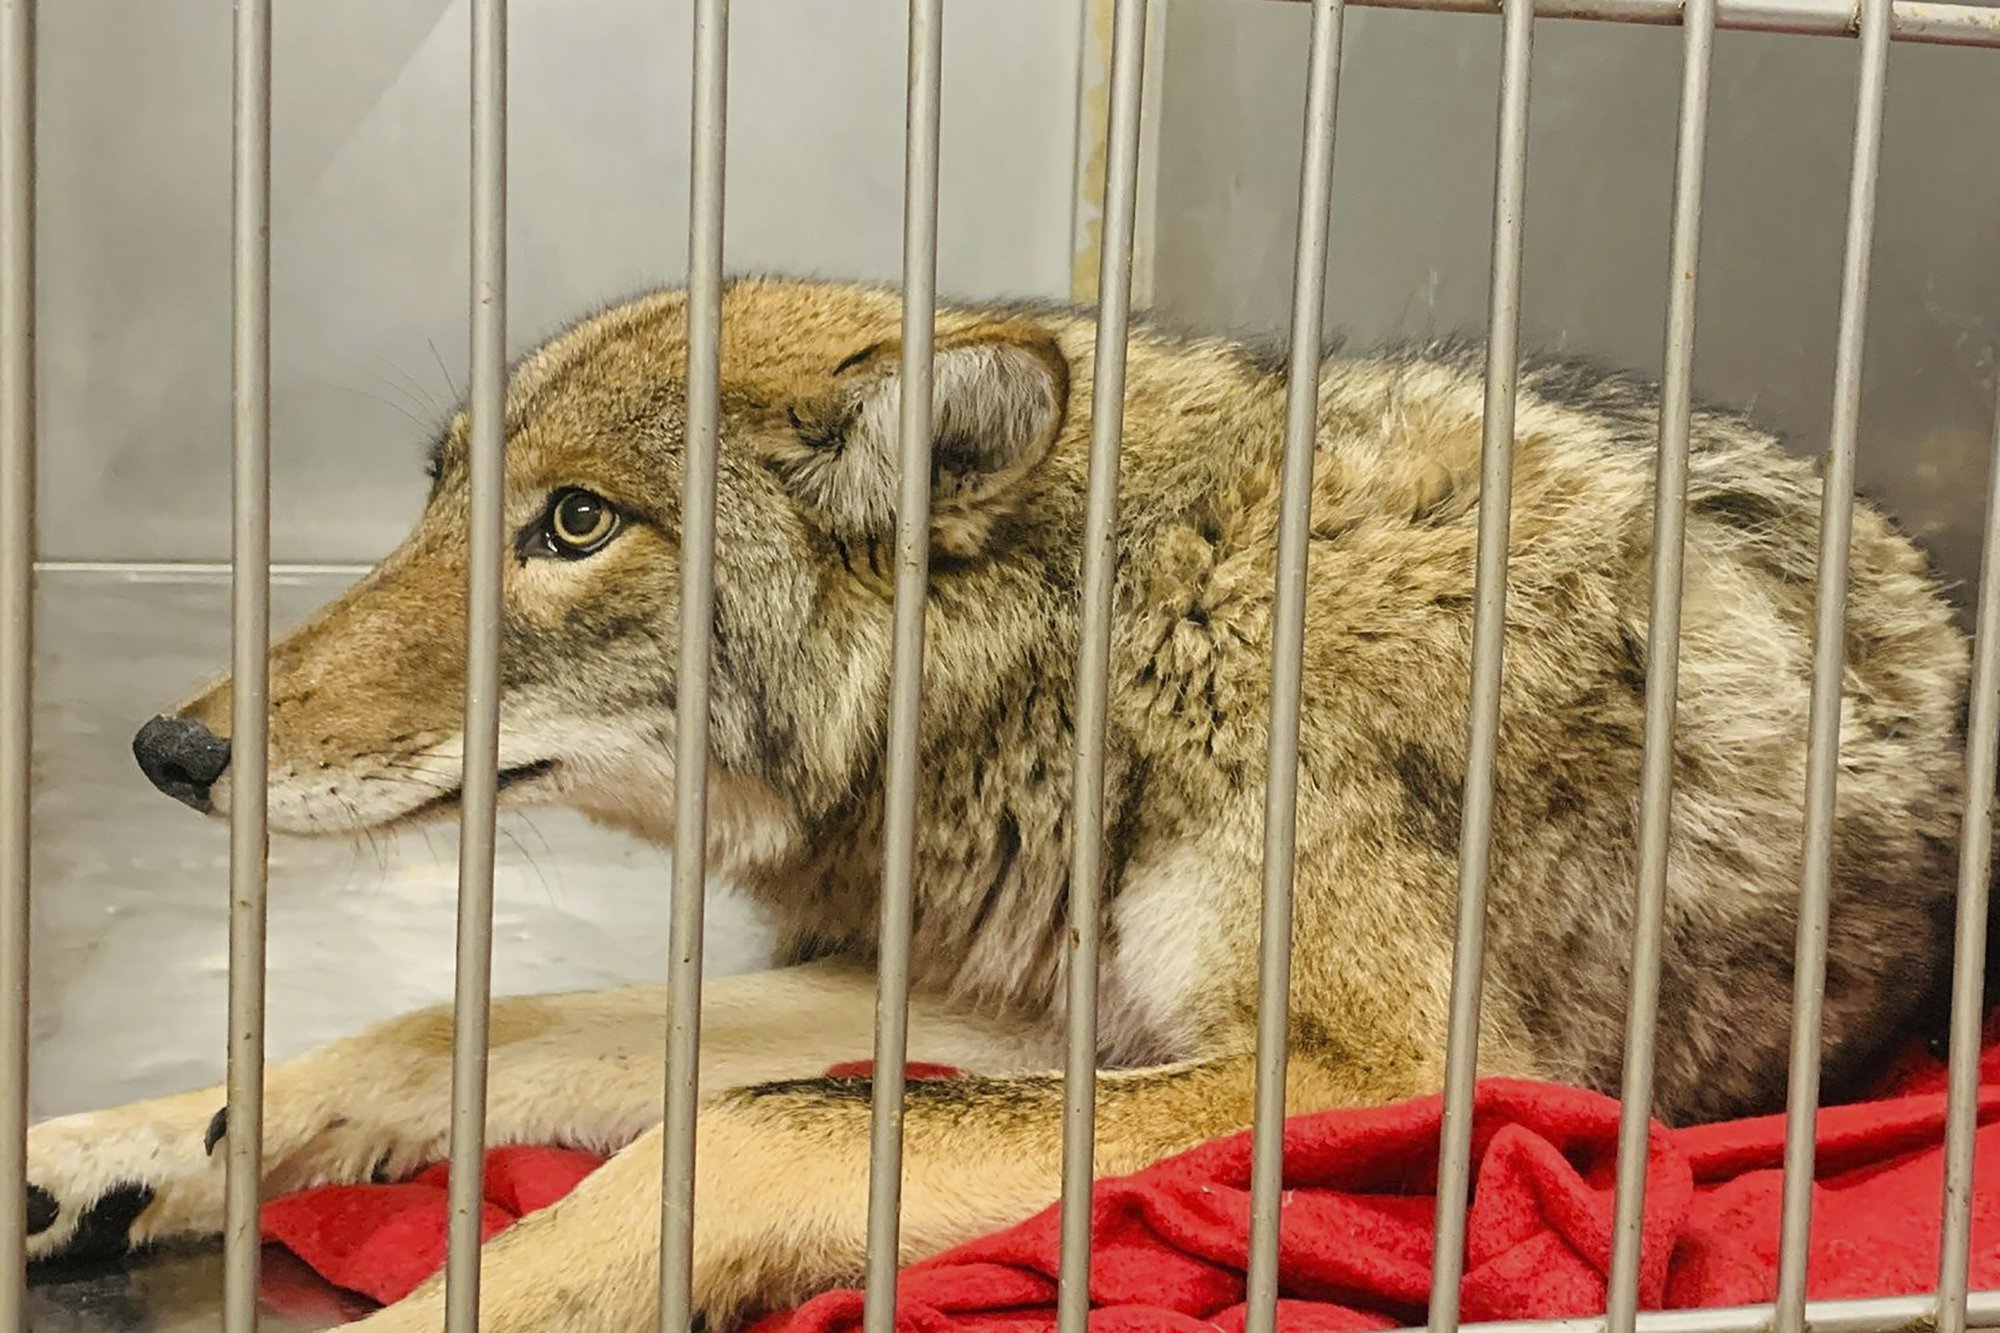 DNA Tests Confirm Coyote Captured in Chicago Attacked Boy